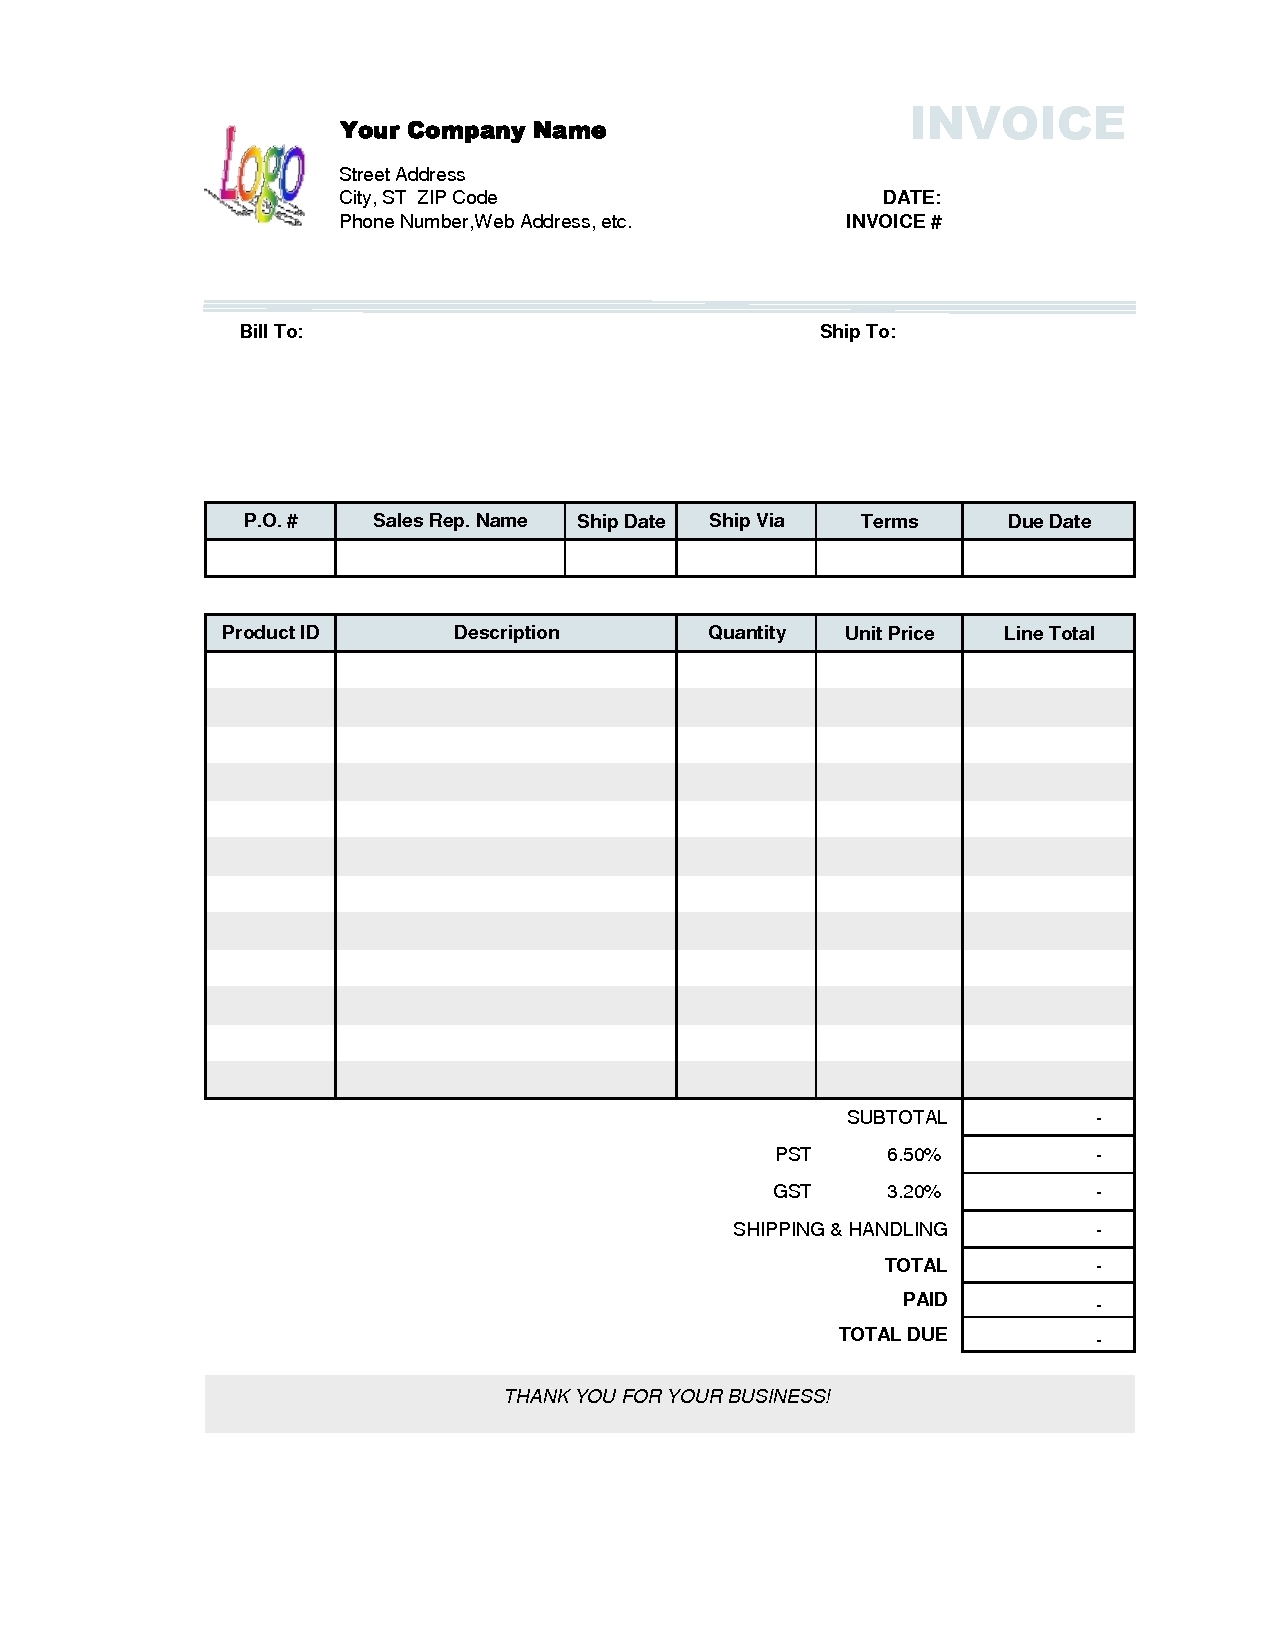 invoices online free invoice template ideas online invoice free